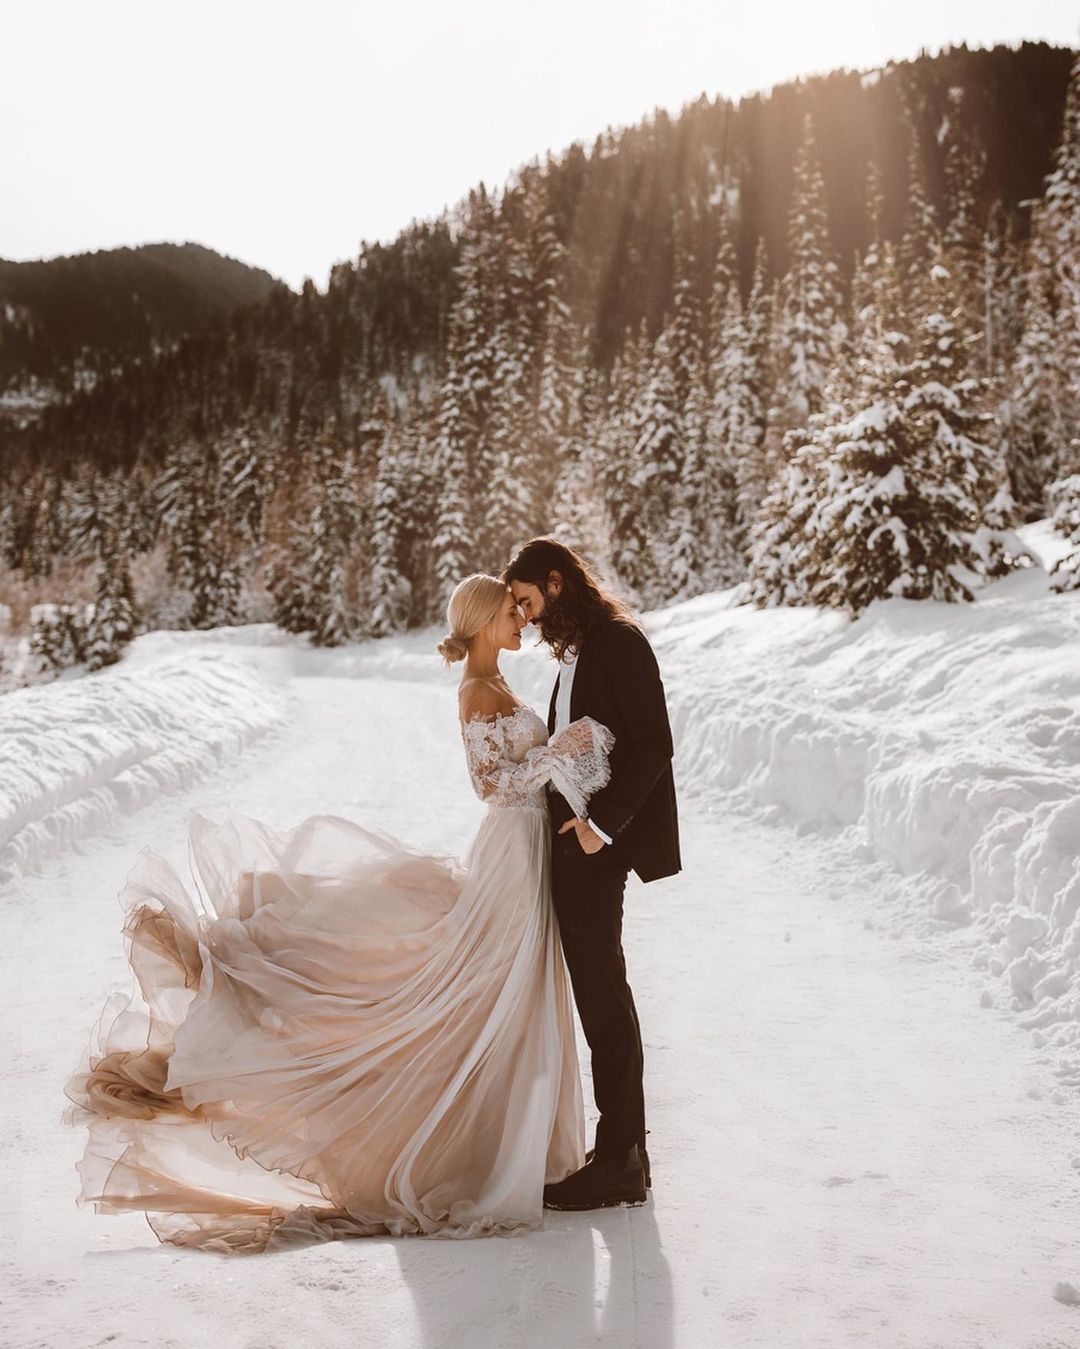 Bridal Sweaters and More Chic Winter Looks for a Wedding in the Snow